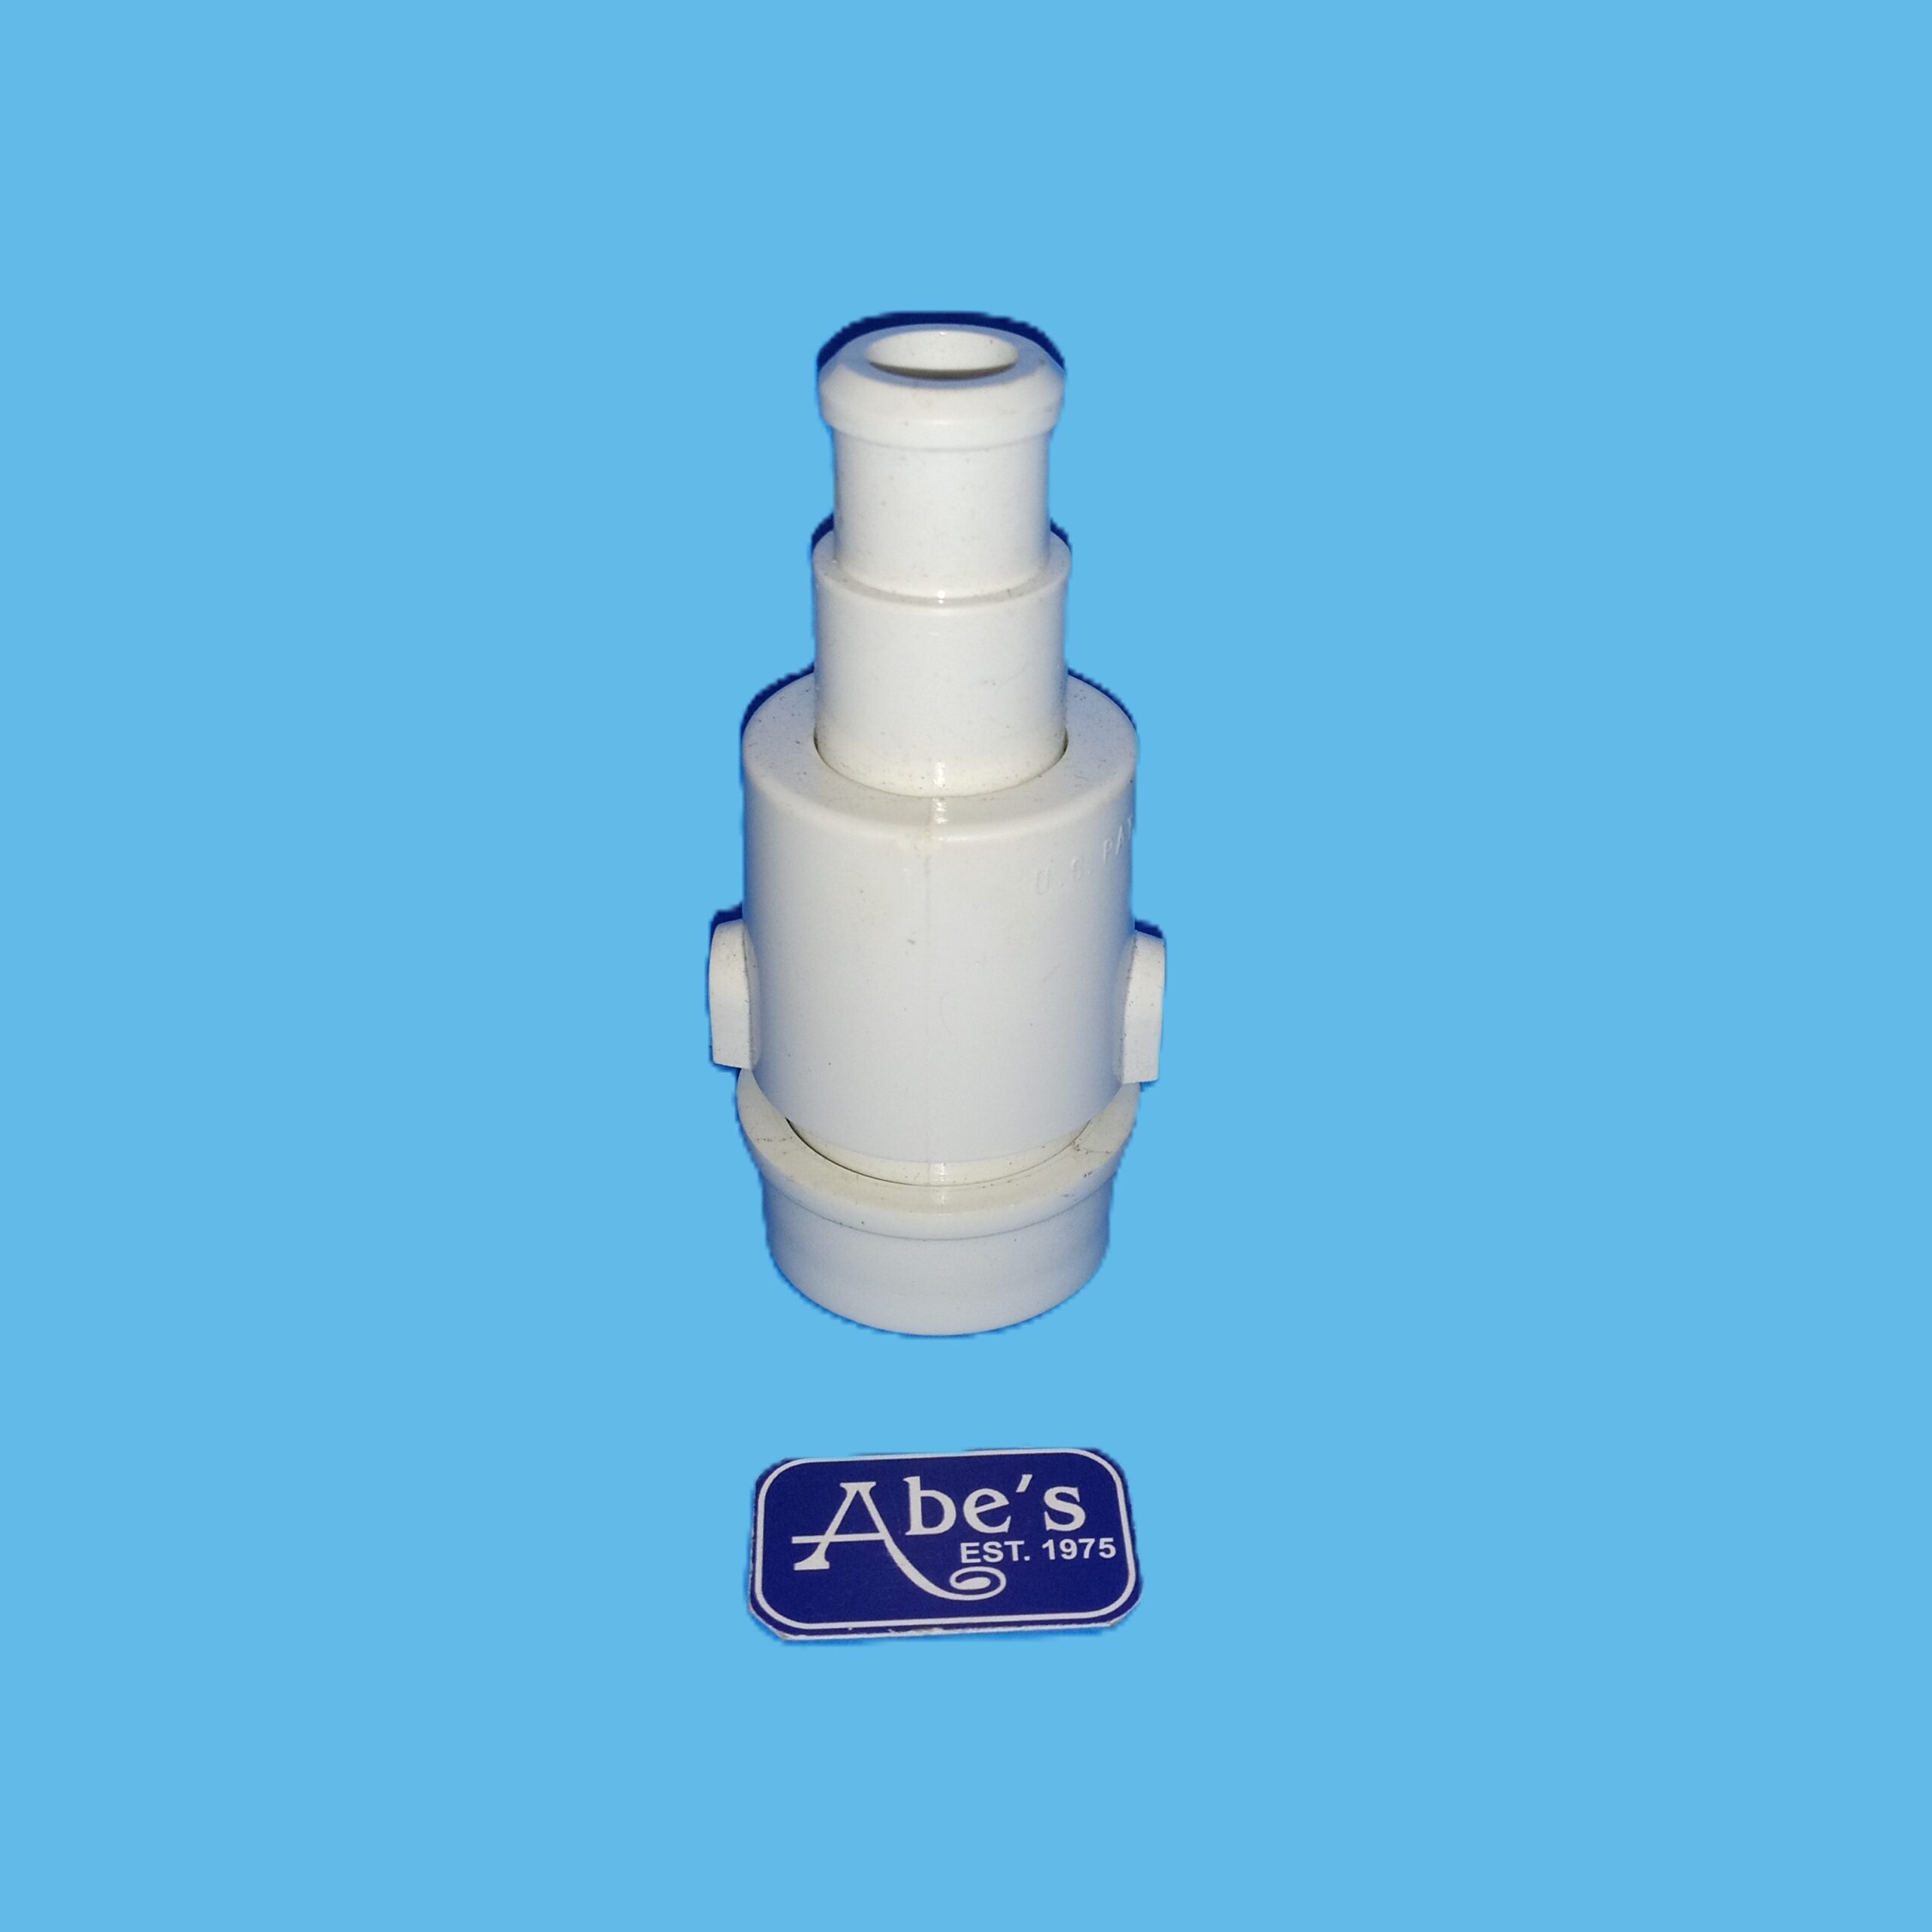 Hayward Quick Disconnect Swivel for Letro Pool Sweep / AXD41 / Affordable $16.75 / Hard to Find Pool cleaner parts? Find Hard to Find Parts at Abe's Pools & Spas